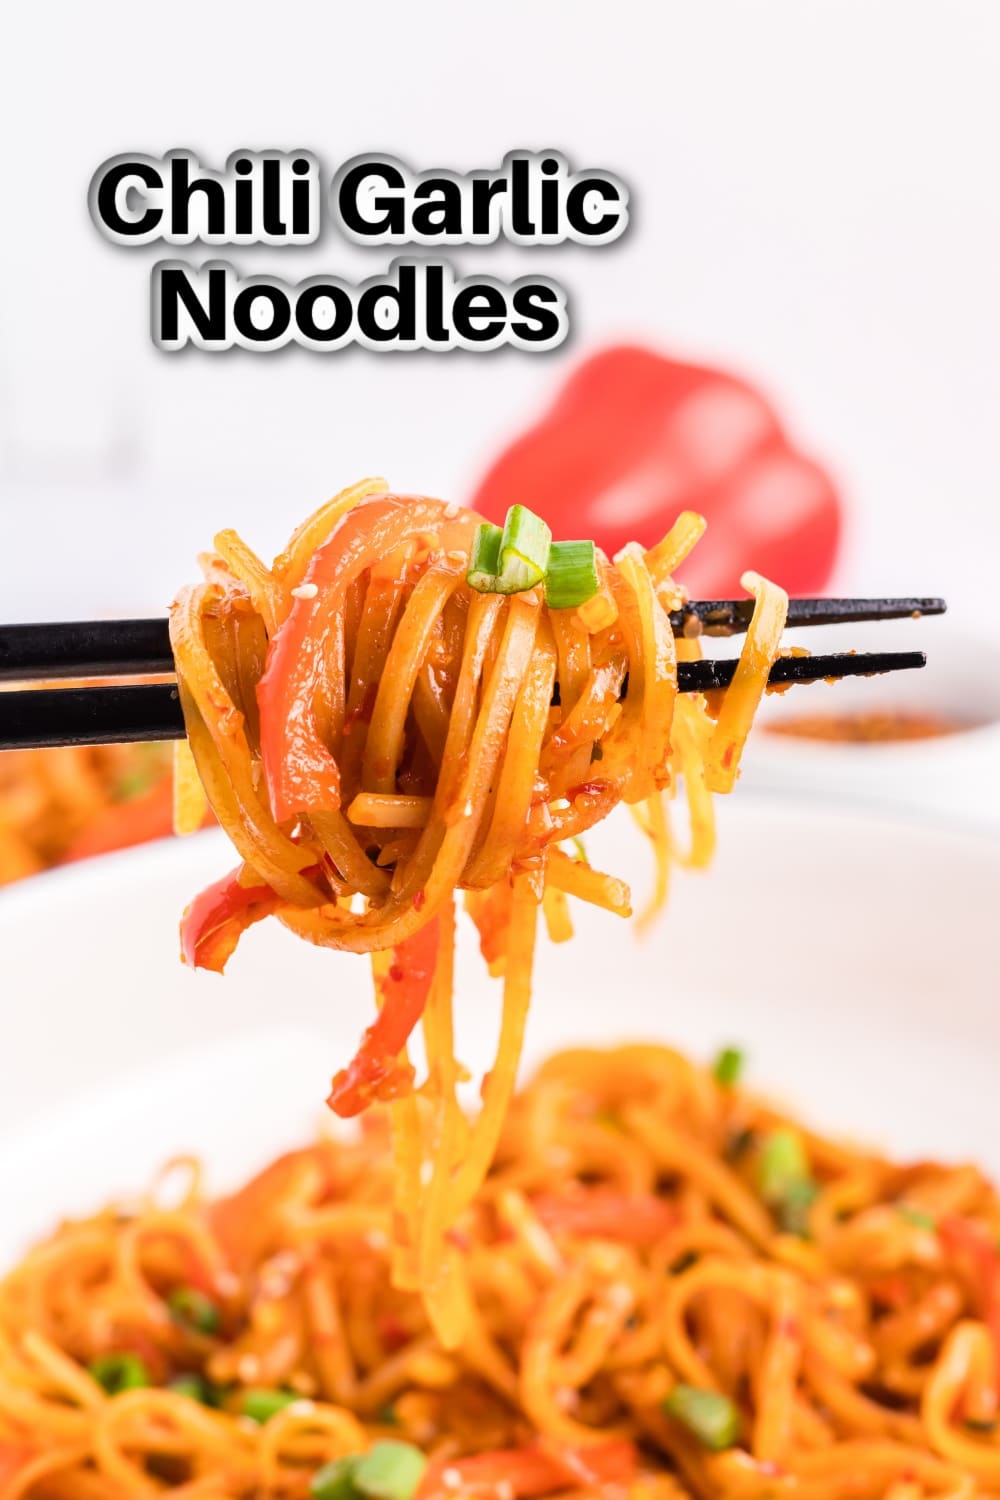 Chili garlic noodles, a quick and delicious side dish recipe tossed in a spicy-fragrant chili garlic sauce.  Perfect for a busy weeknight and packed with so much flavor. I love making this noodle dish. via @cmpollak1